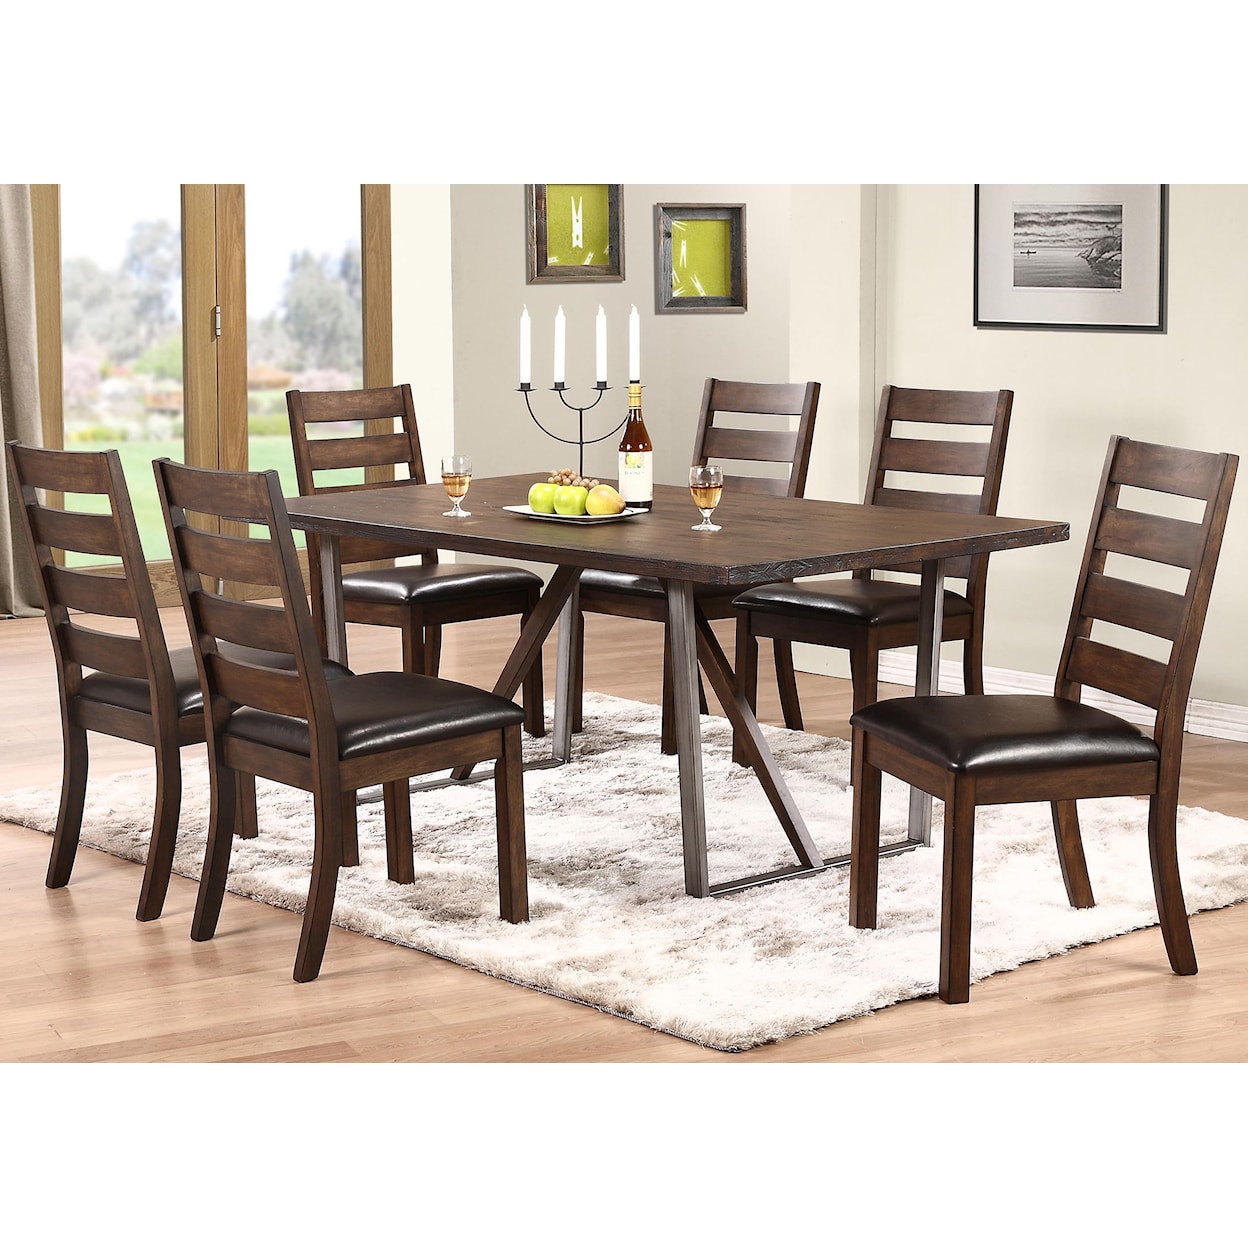 Winners Only Kendall 7 Piece Dining Set